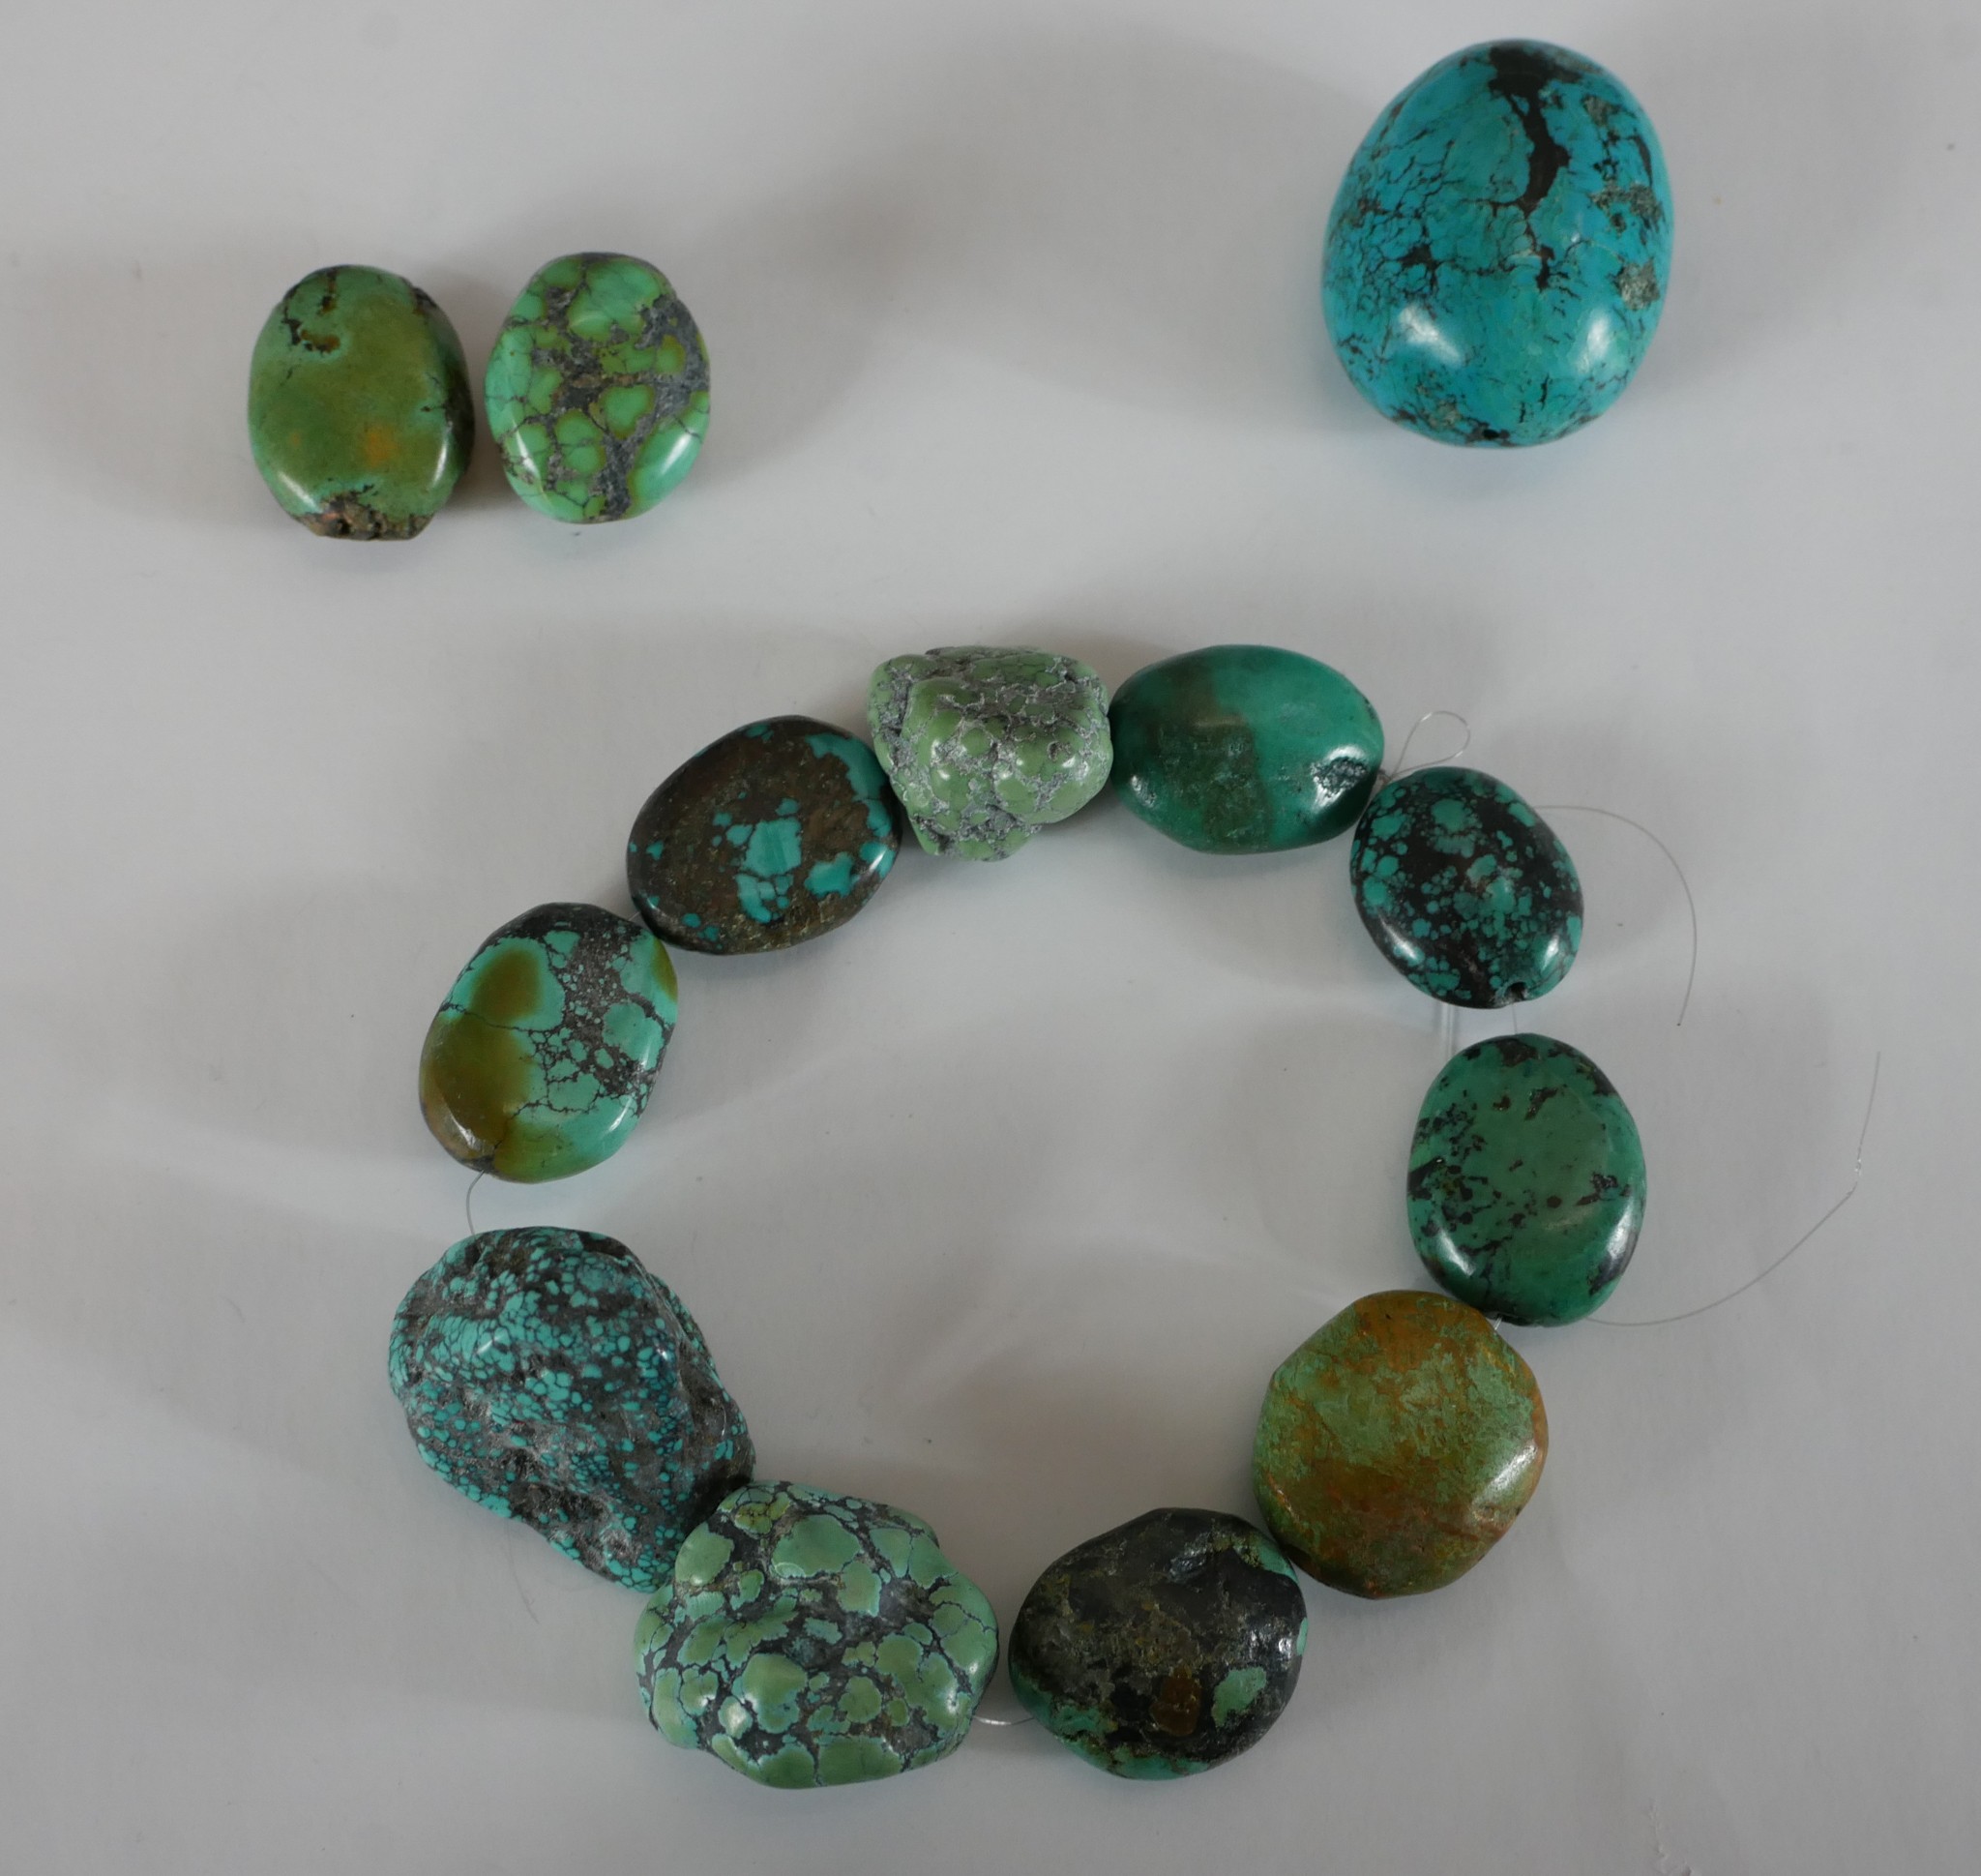 A collection of Turquoise beads, the largest bead measures 4.5cm. H.13 W.13cm largest